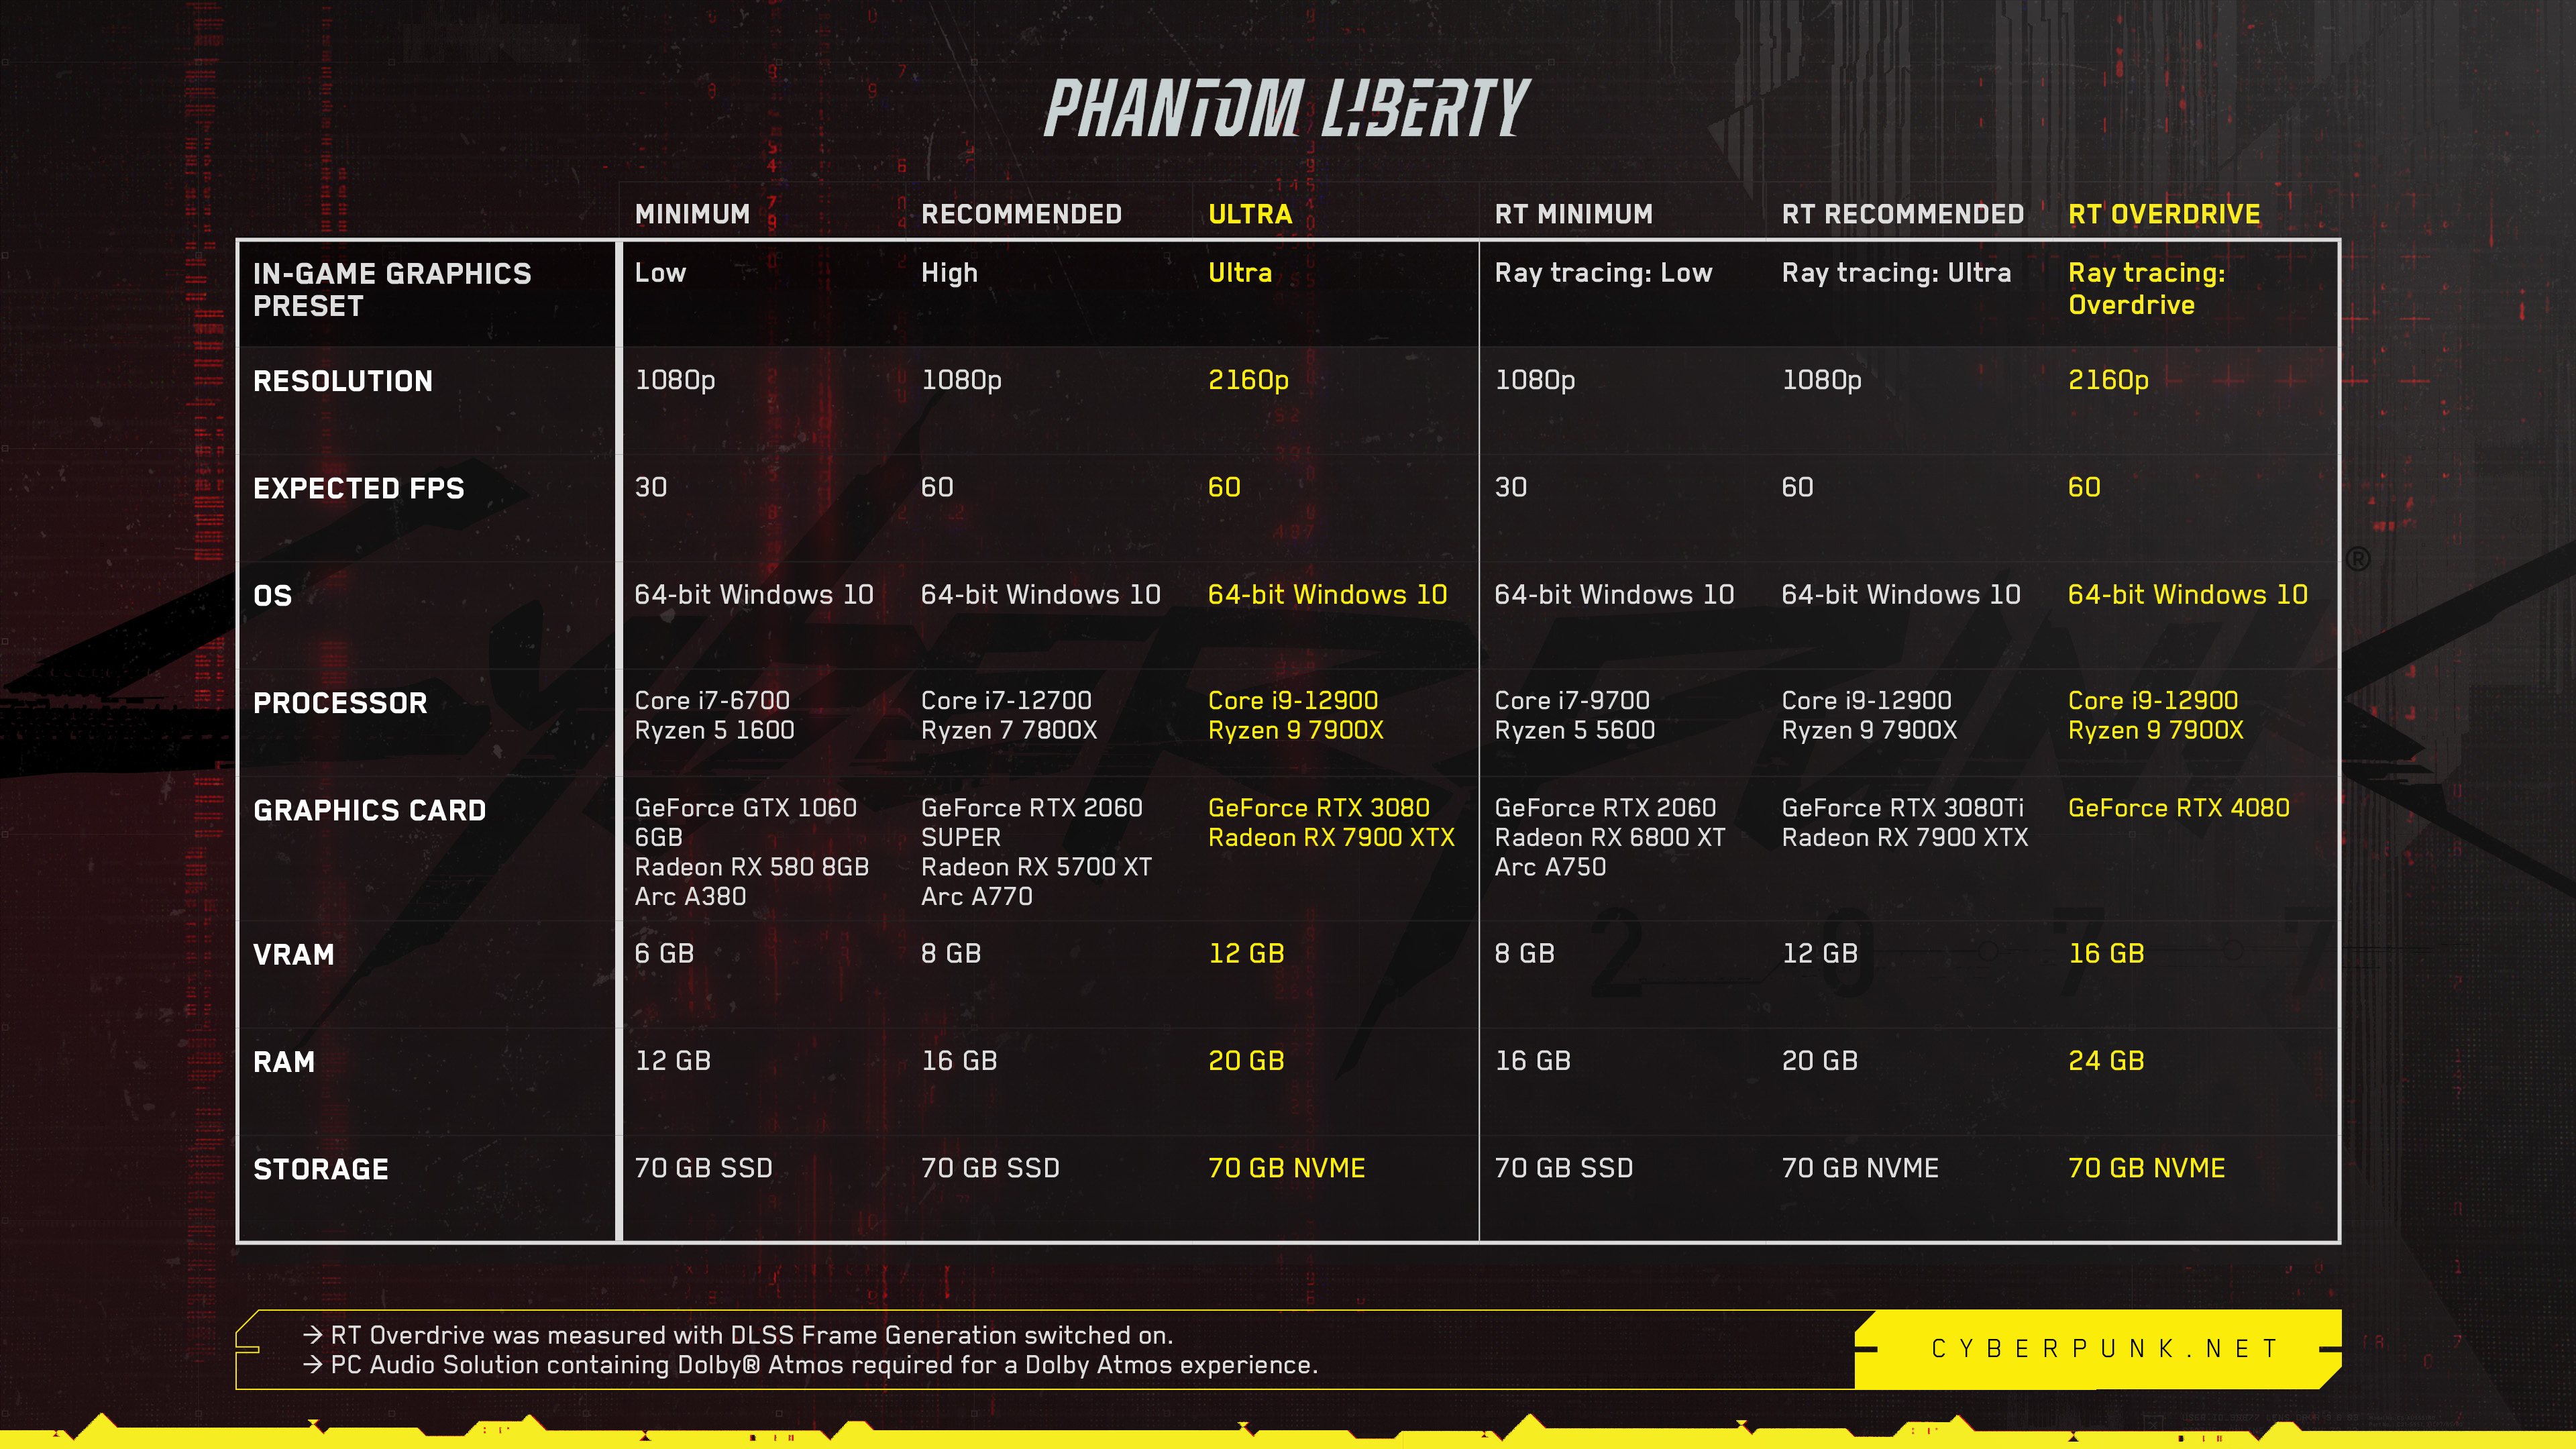 Updated system requirements for Cyberpunk 2077: Phantom Liberty.